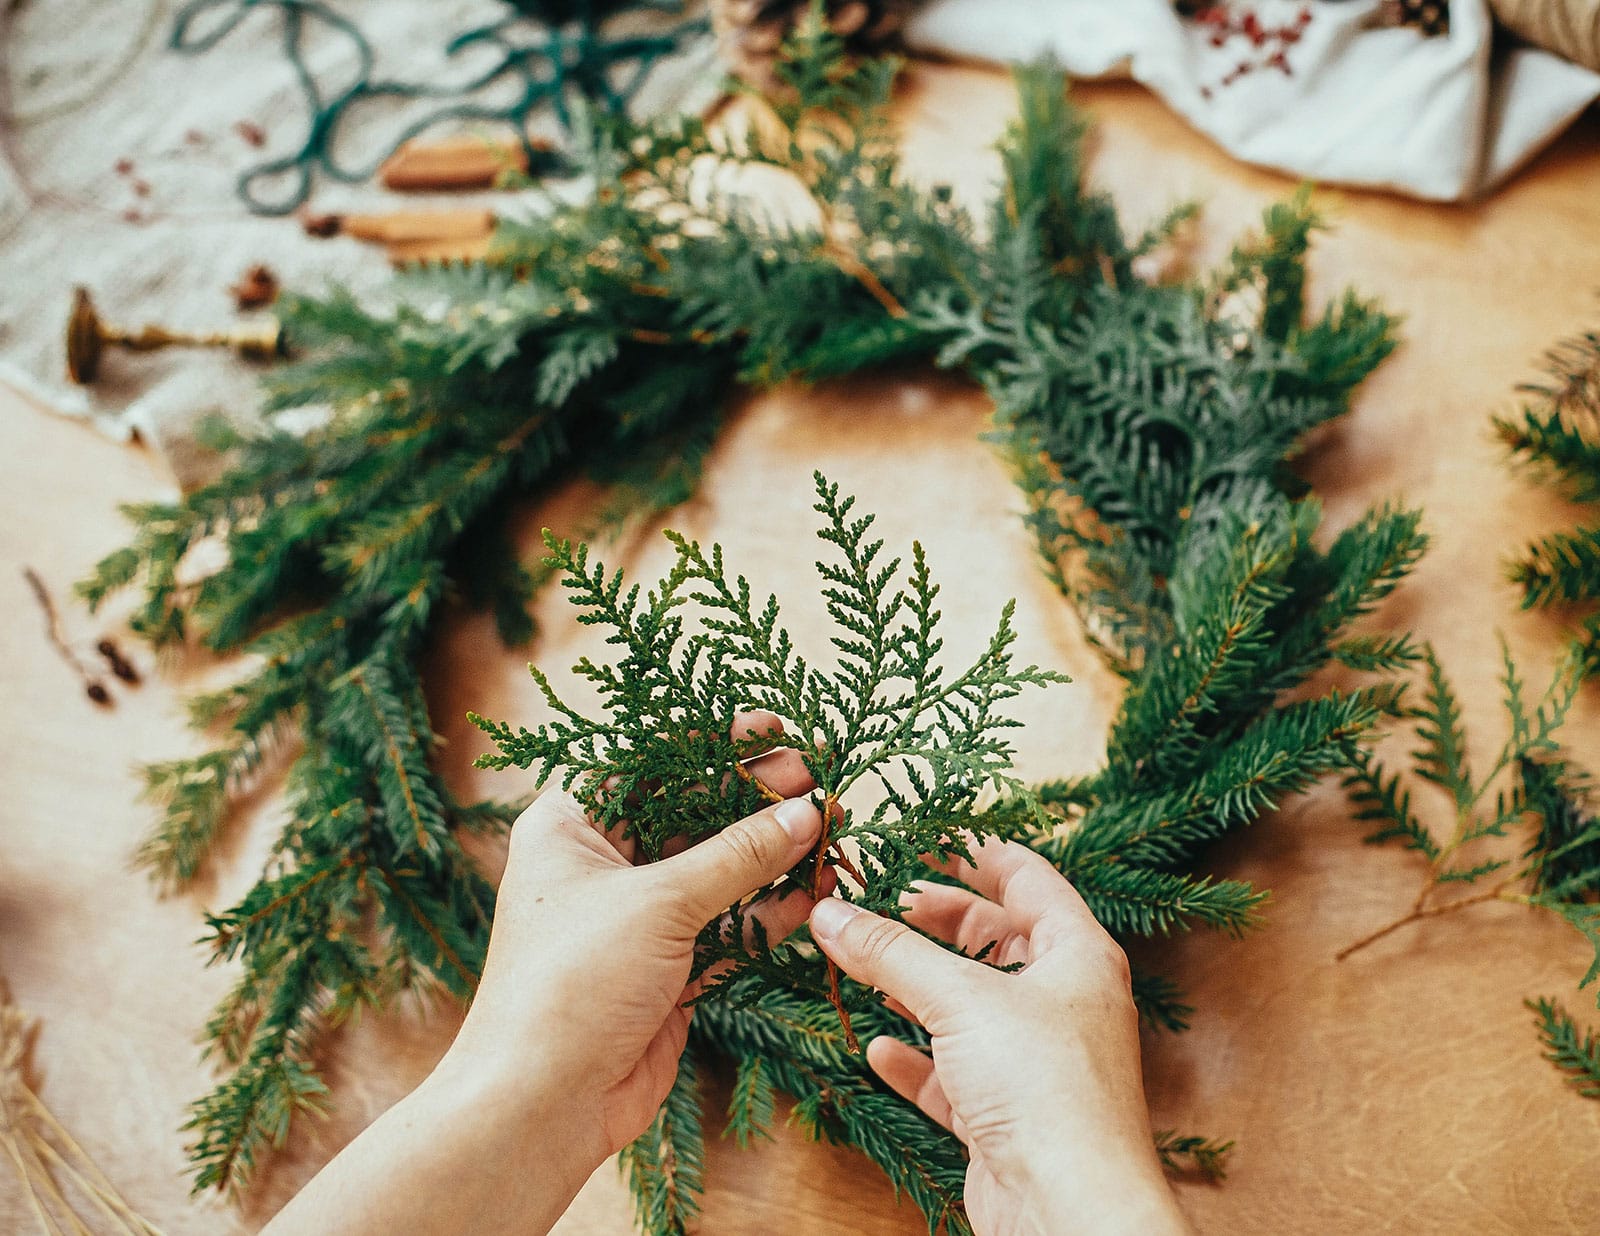 Hands holding a fresh-cut evergreen branch with a homemade wreath in the background